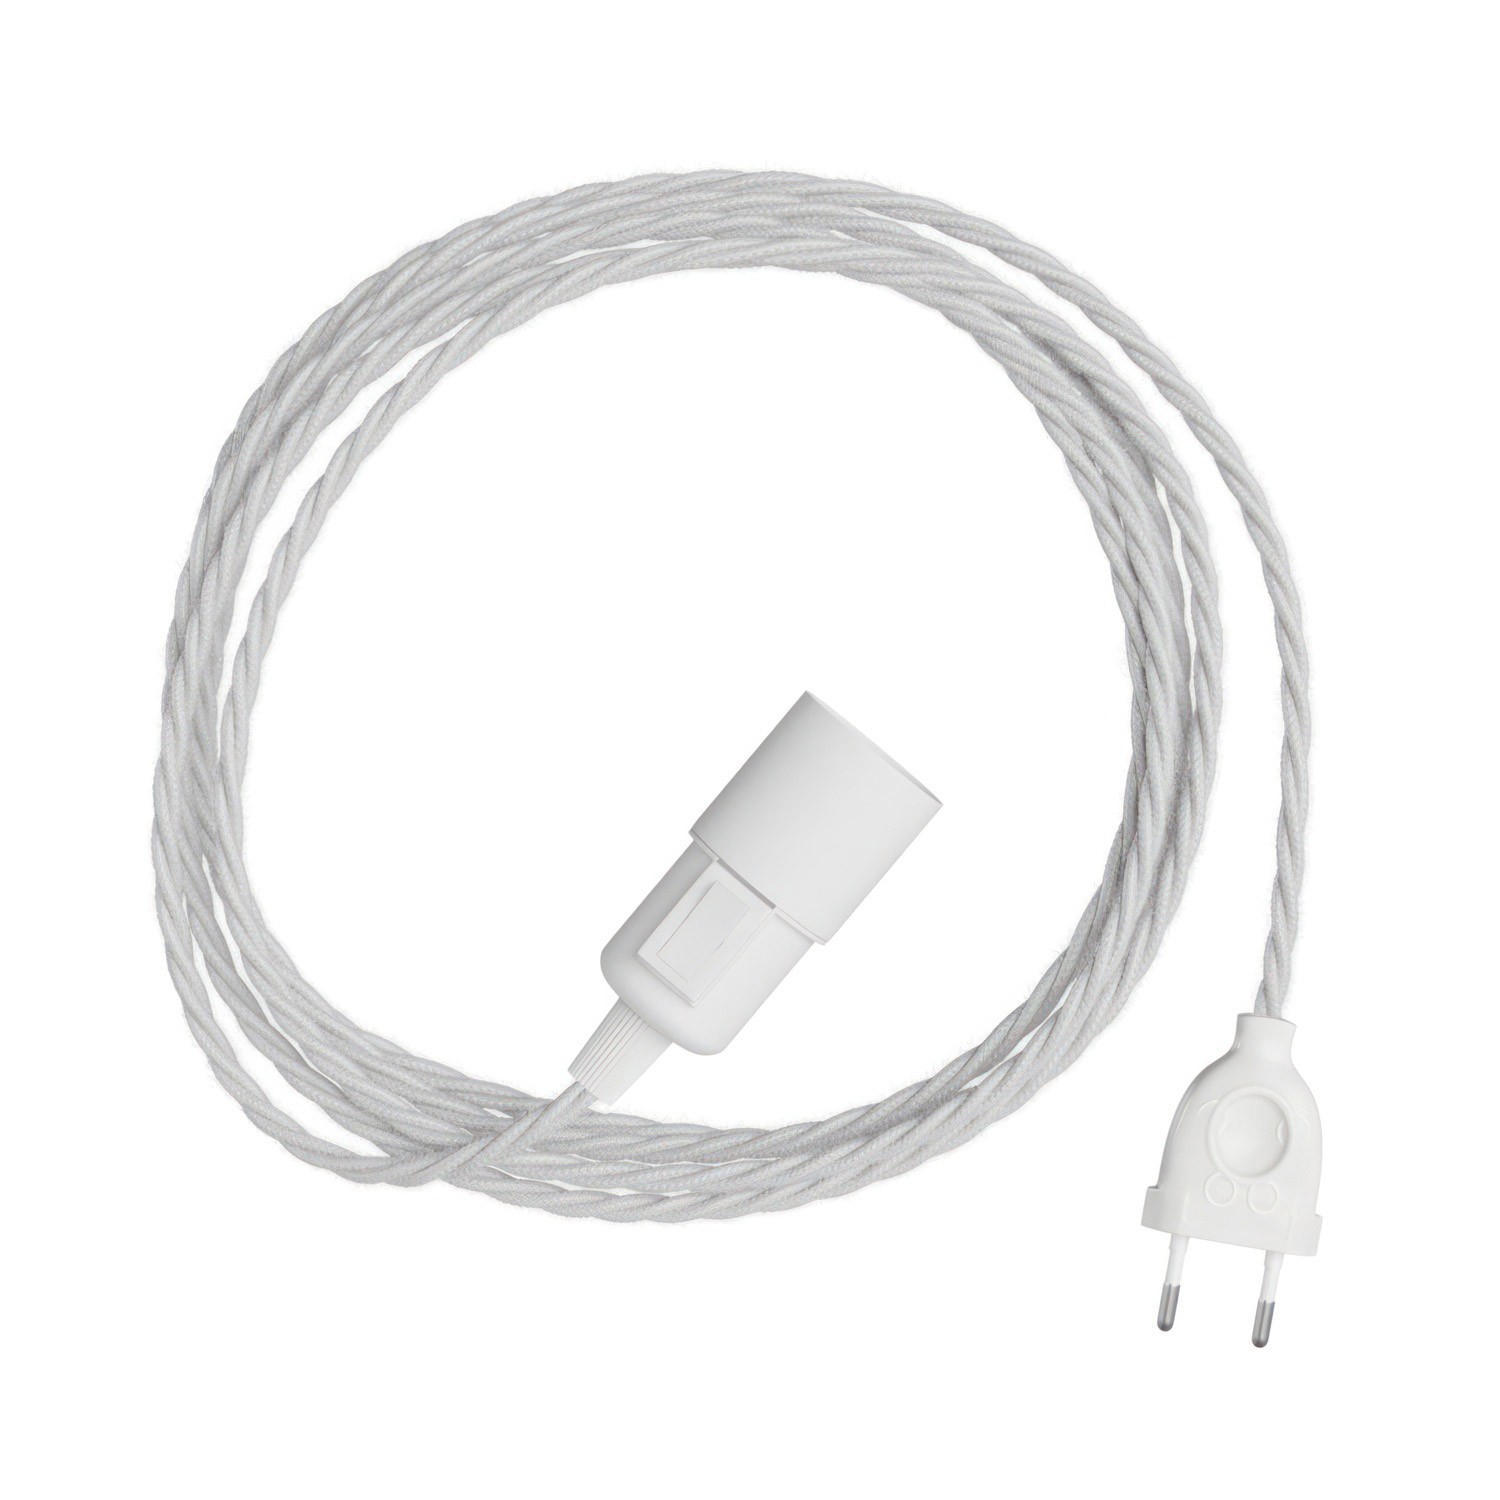 Snake Twisted - Plug-in lamp with coloured twisted textile cable and 2 pole plug